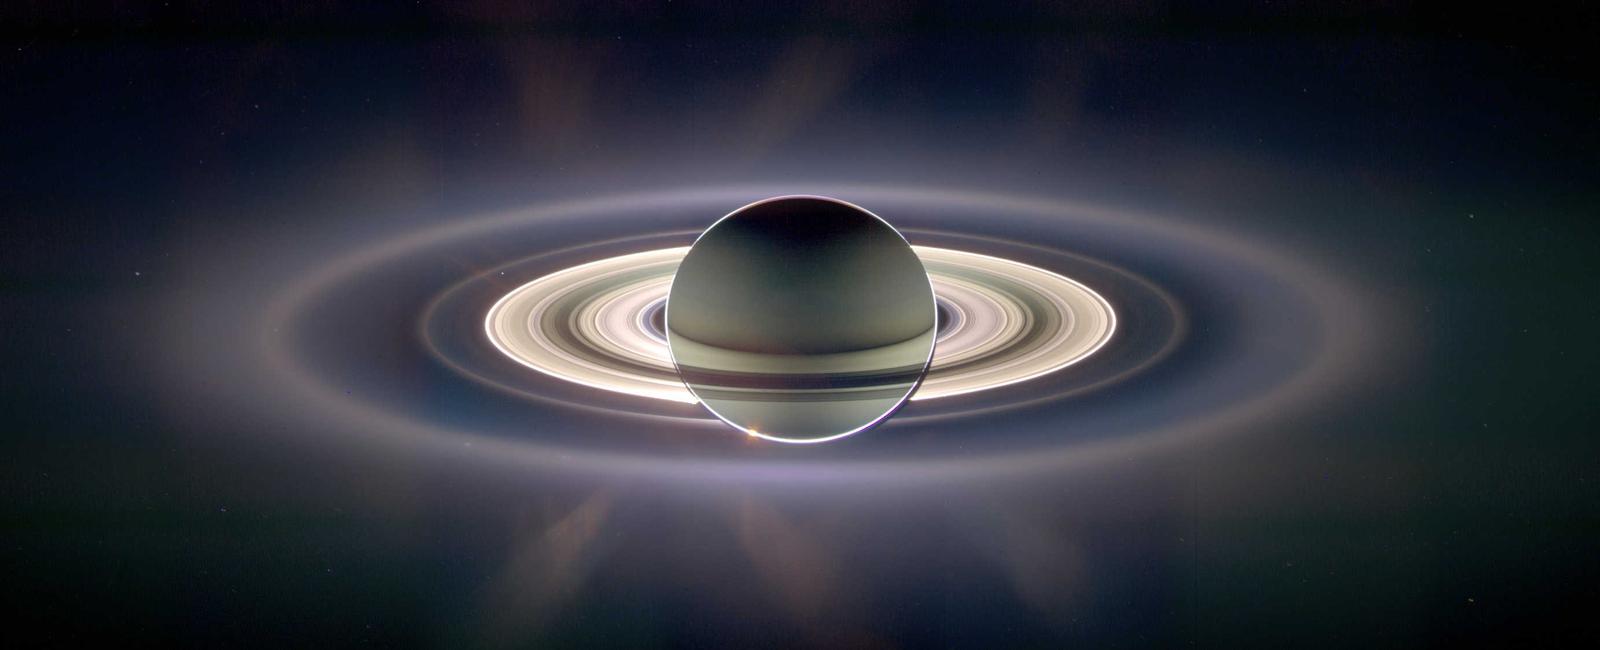 Saturn s rings made up of ice rock and dust are thought to be formed from pieces of asteroids comets and shattered moons